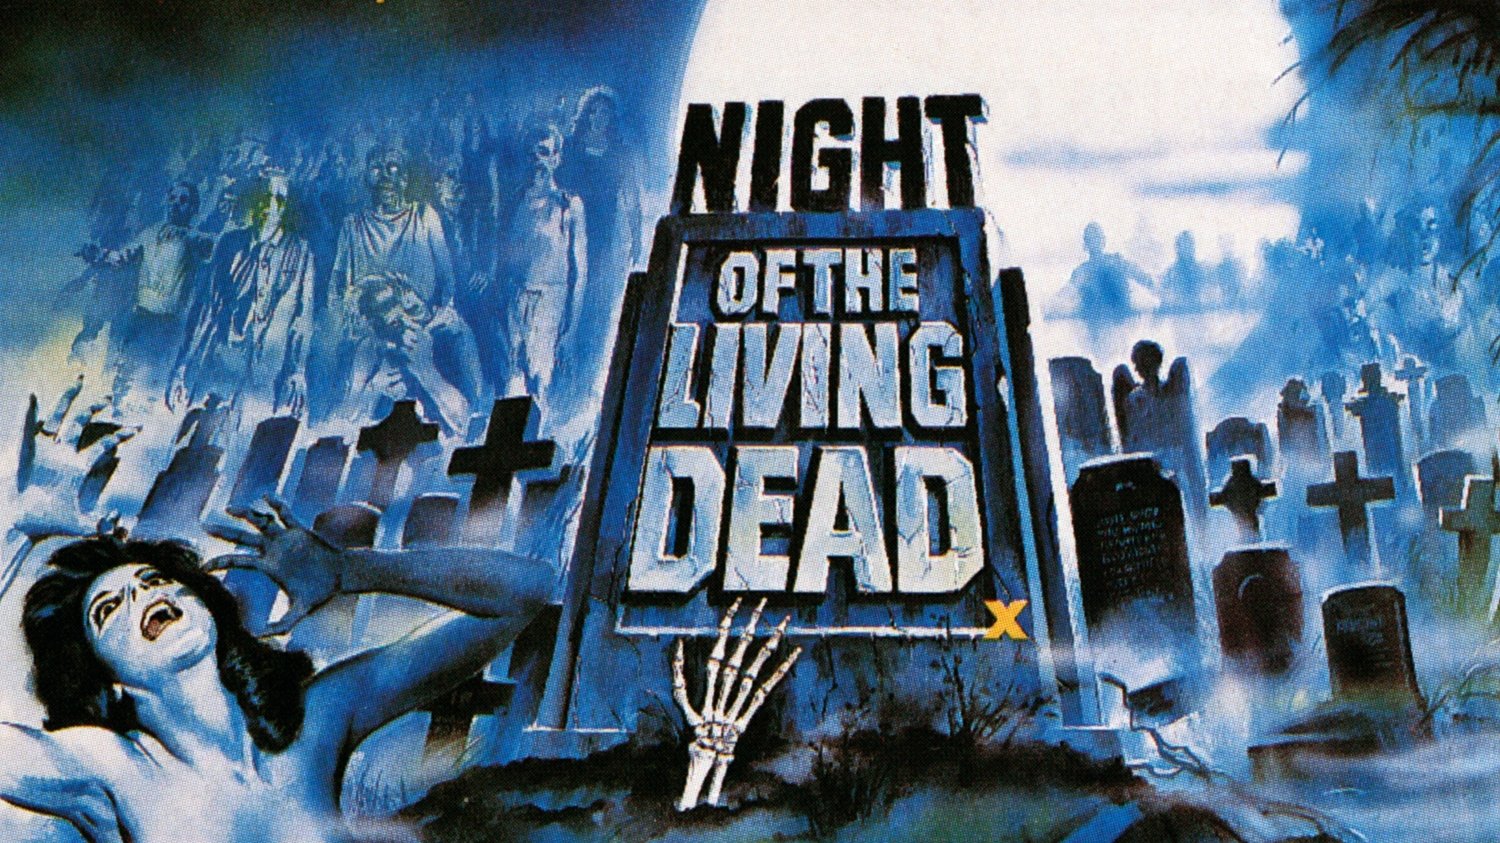 'Night of the Living Dead' poster